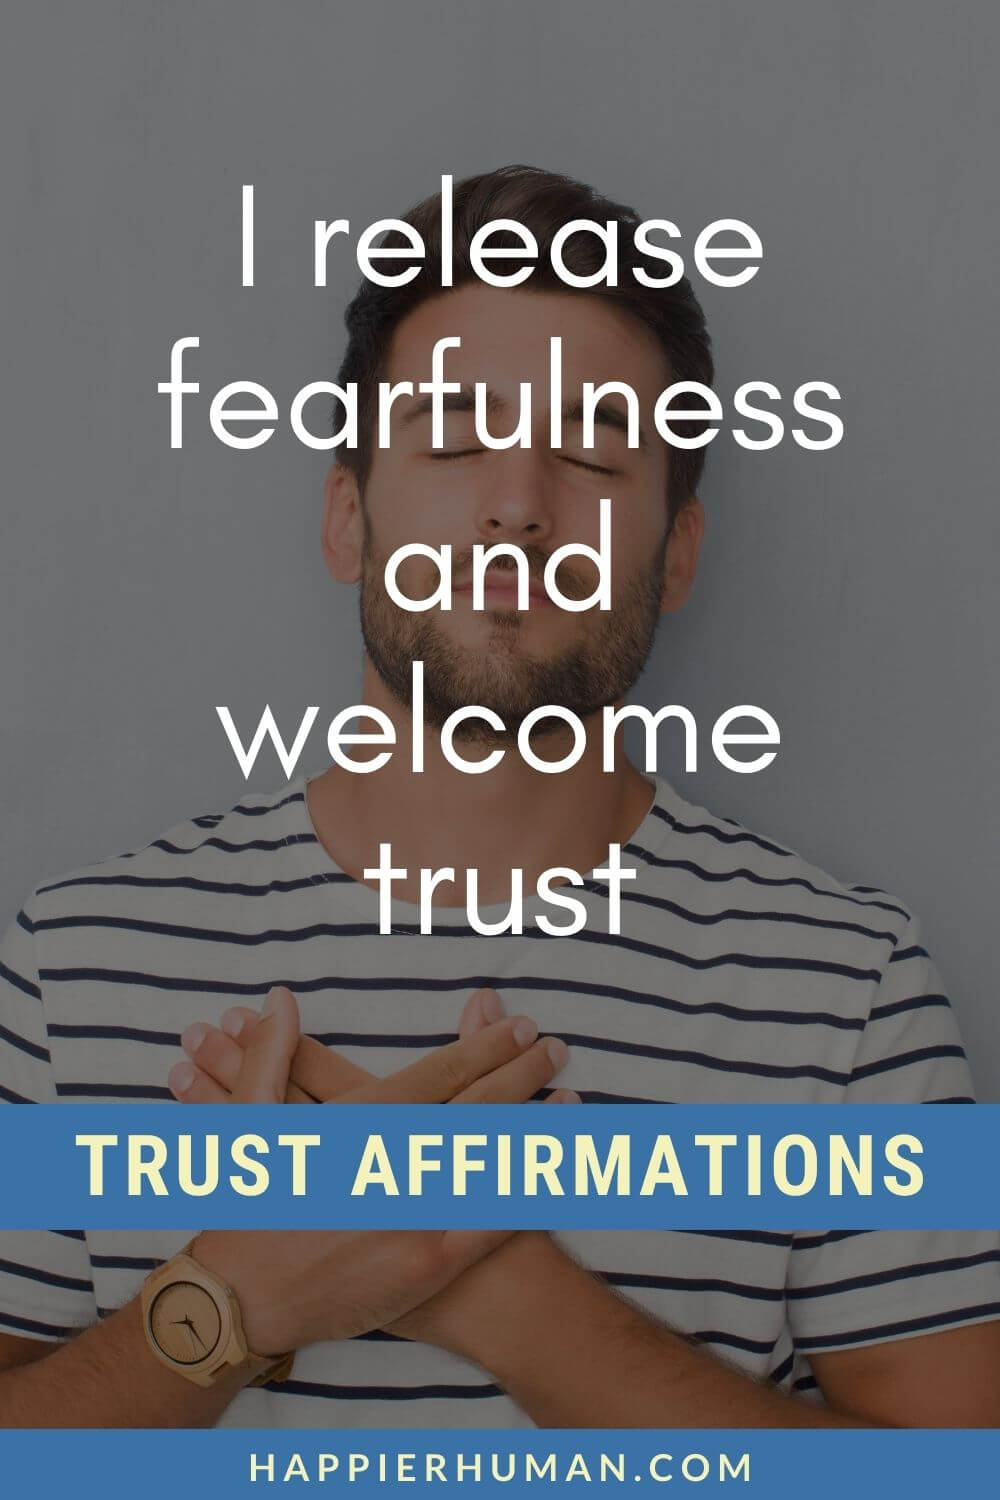 Trust Affirmations - I release fearfulness and welcome trust | relationship trust affirmations | affirmations for trusting the universe | self trust affirmations